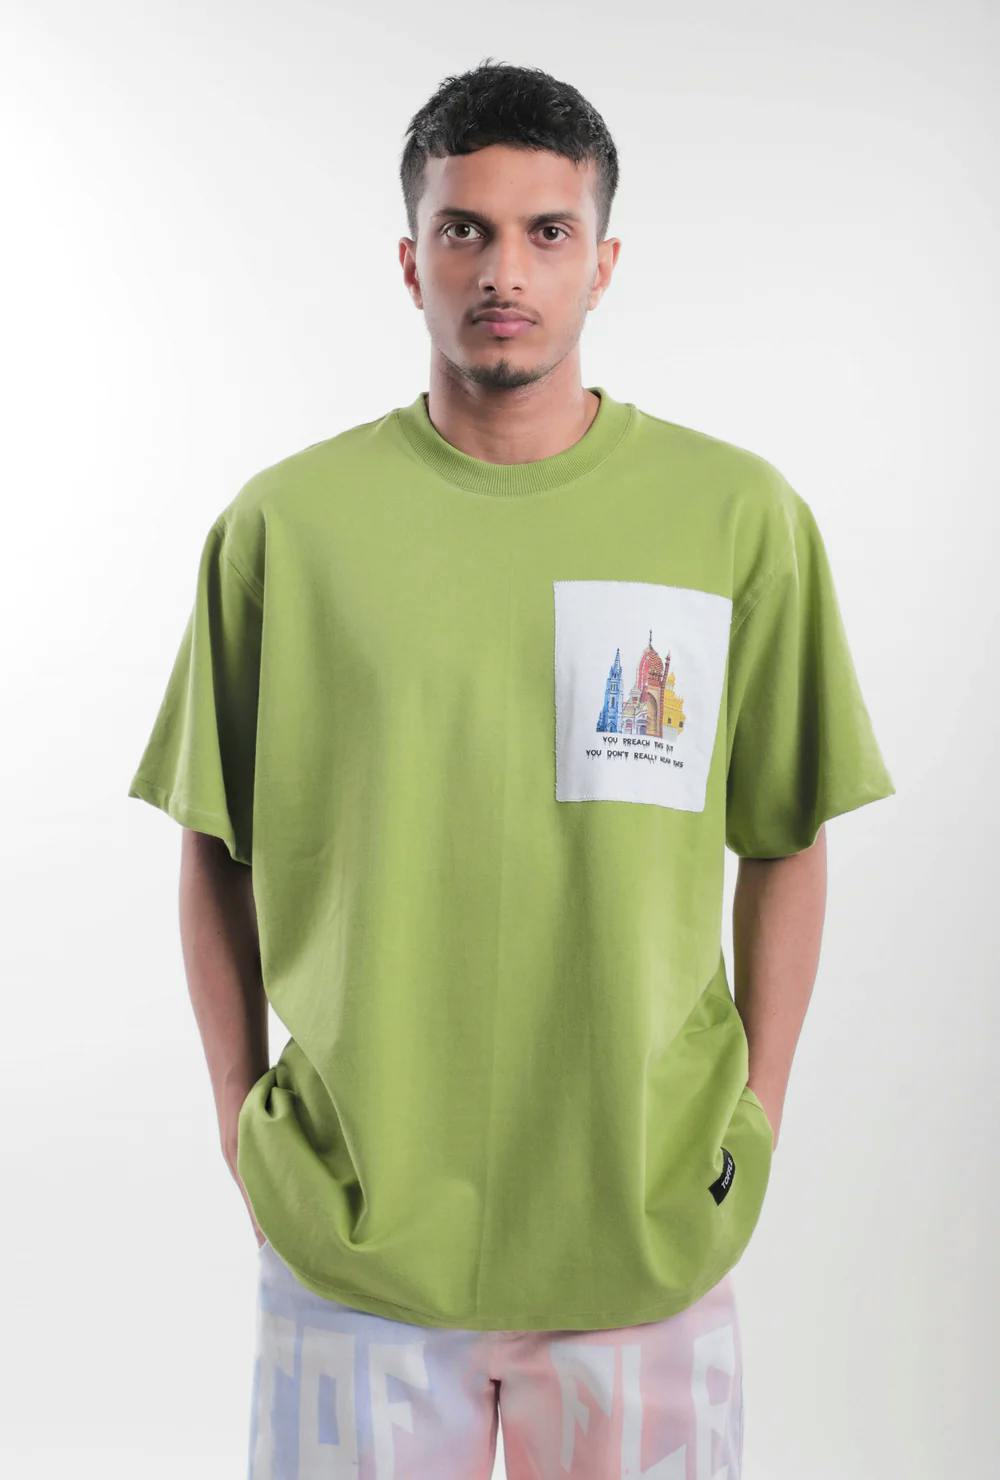 Religious Unity T-shirt, a product by TOFFLE